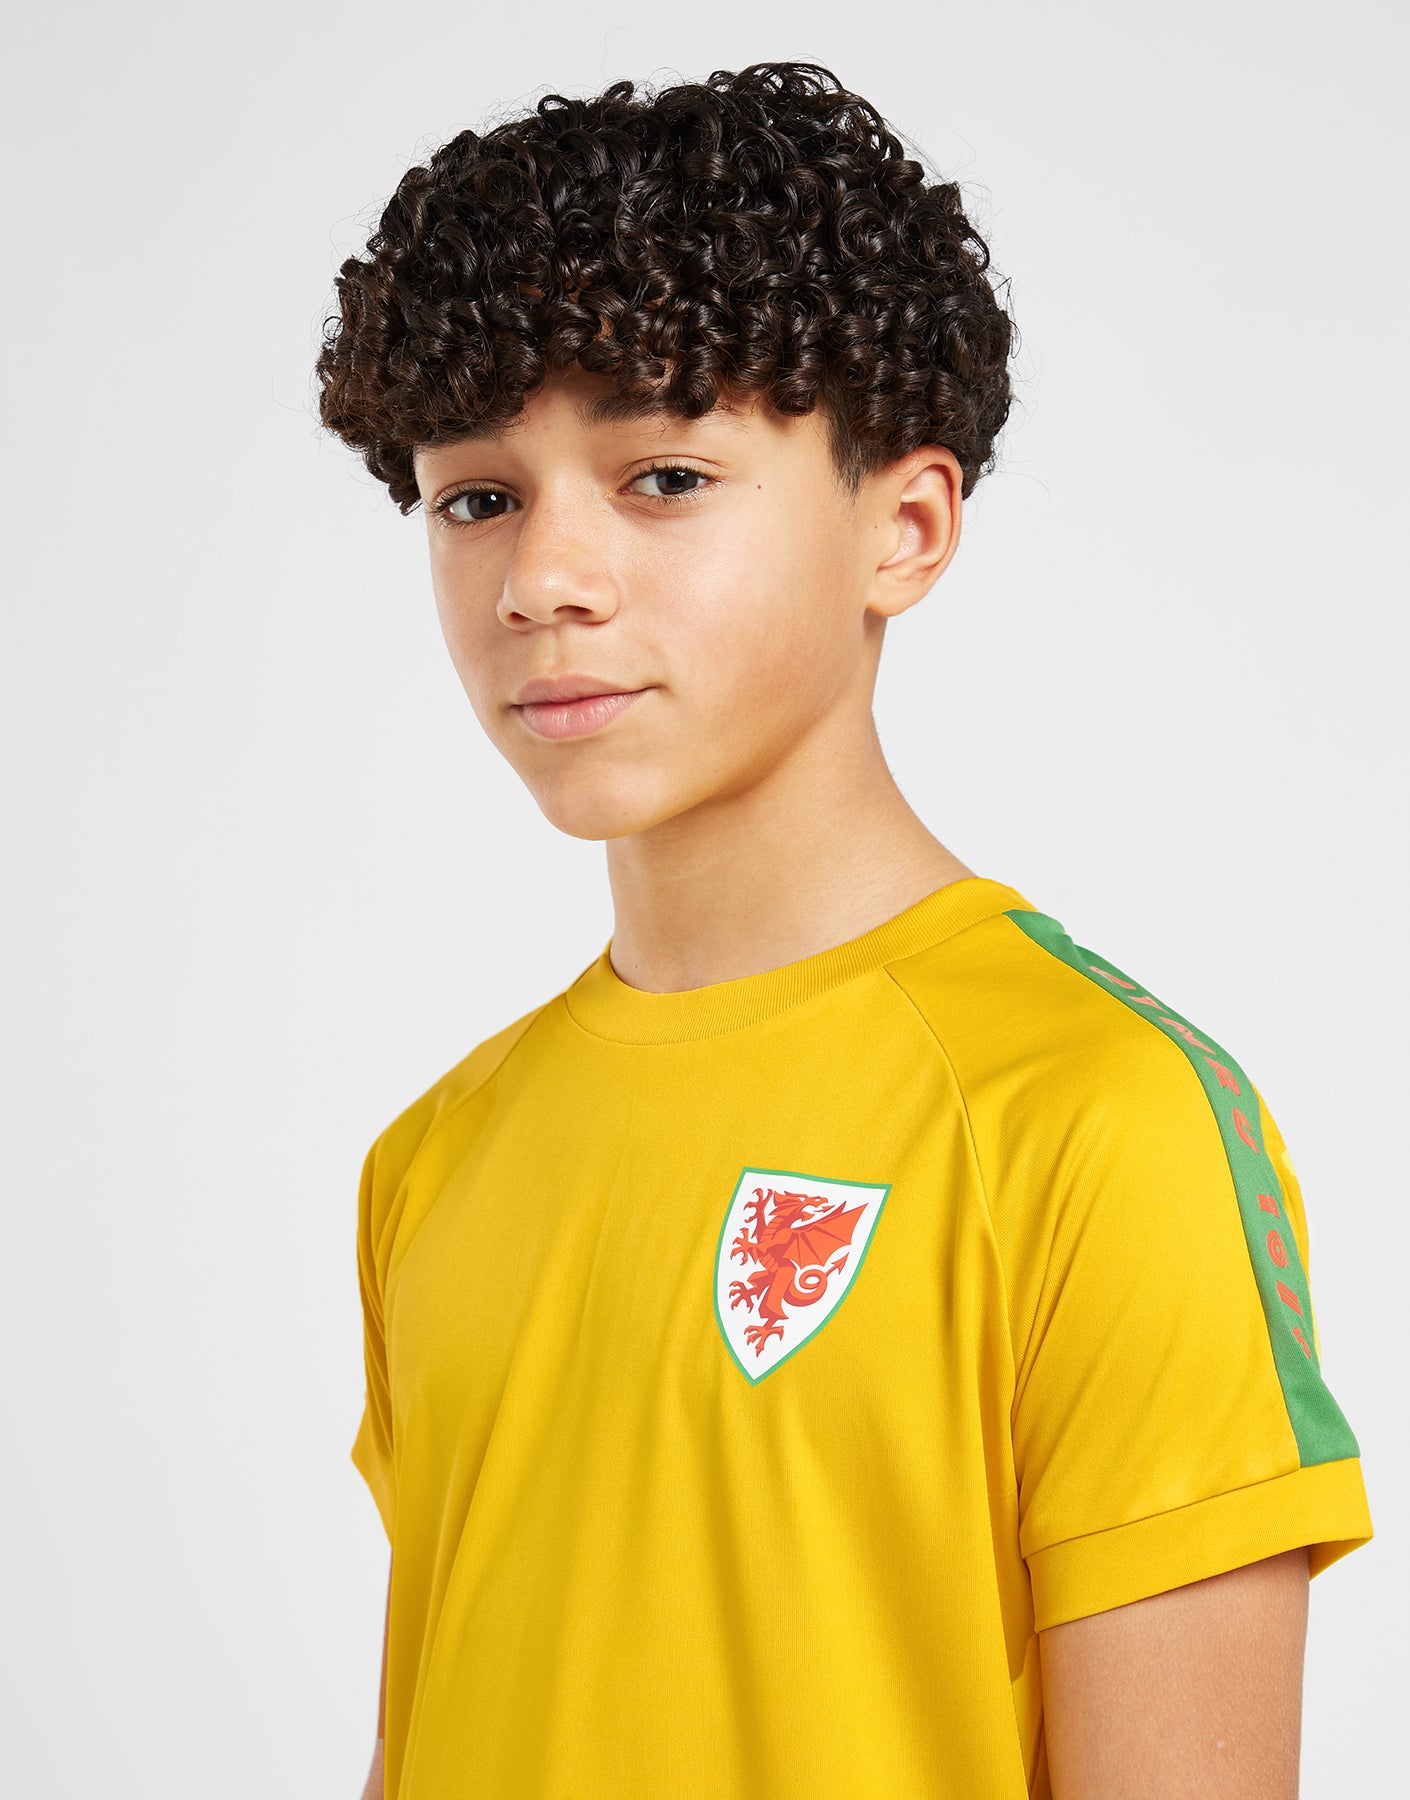 Official Team Wales Kids Sleeve Print T-Shirt - Yellow - The World Football Store